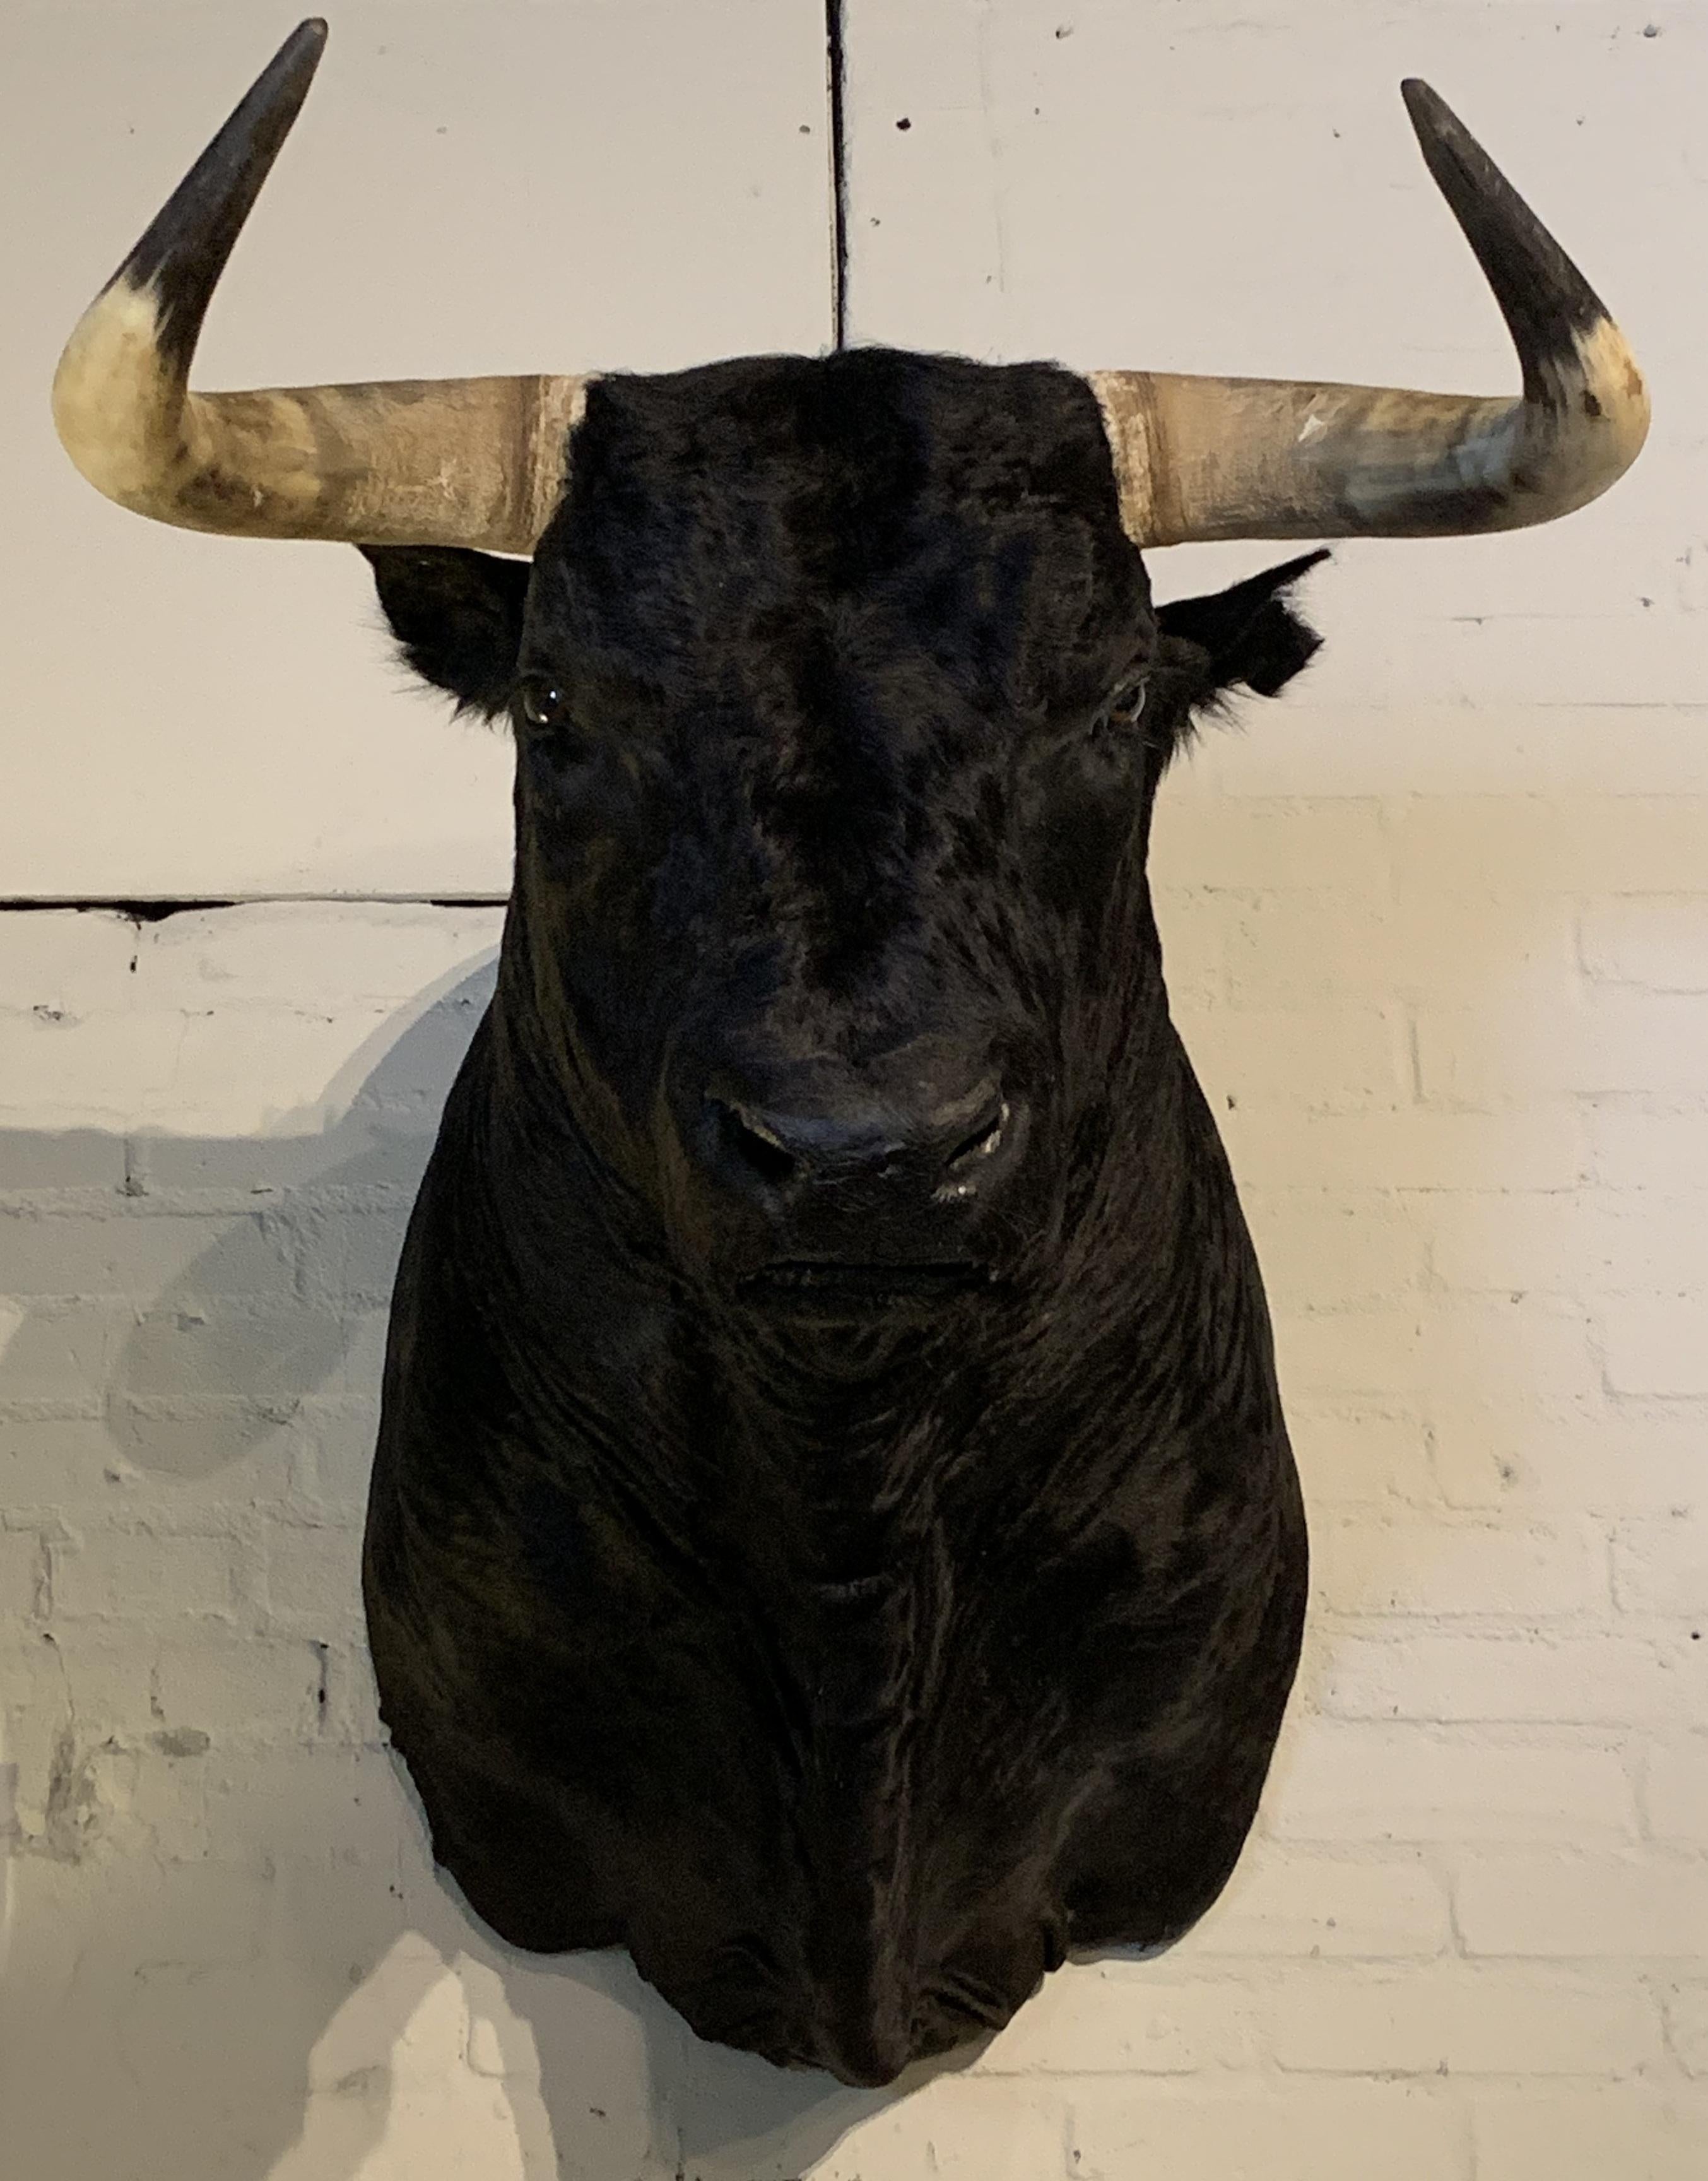 Exclusive taxidermy head of a Spanish fighting bull.
The head is made very lifelike. A real masterpiece of taxidermy.

We have several heads available.